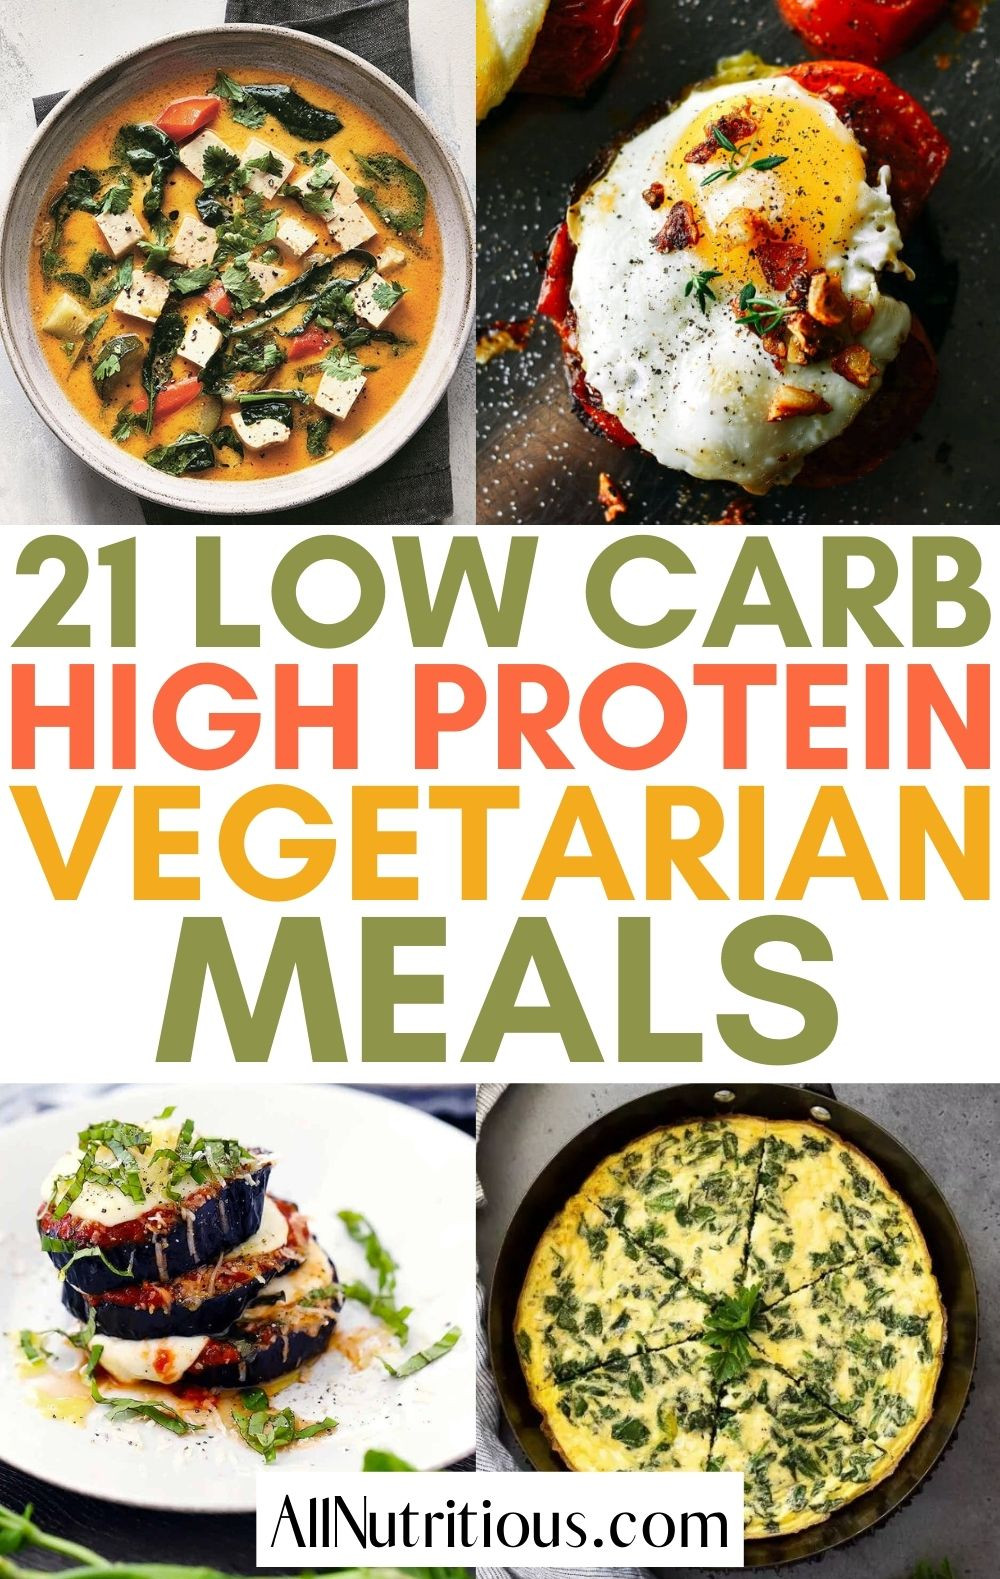 The Most Satisfying High Protein Low Carb Vegetarian Meals